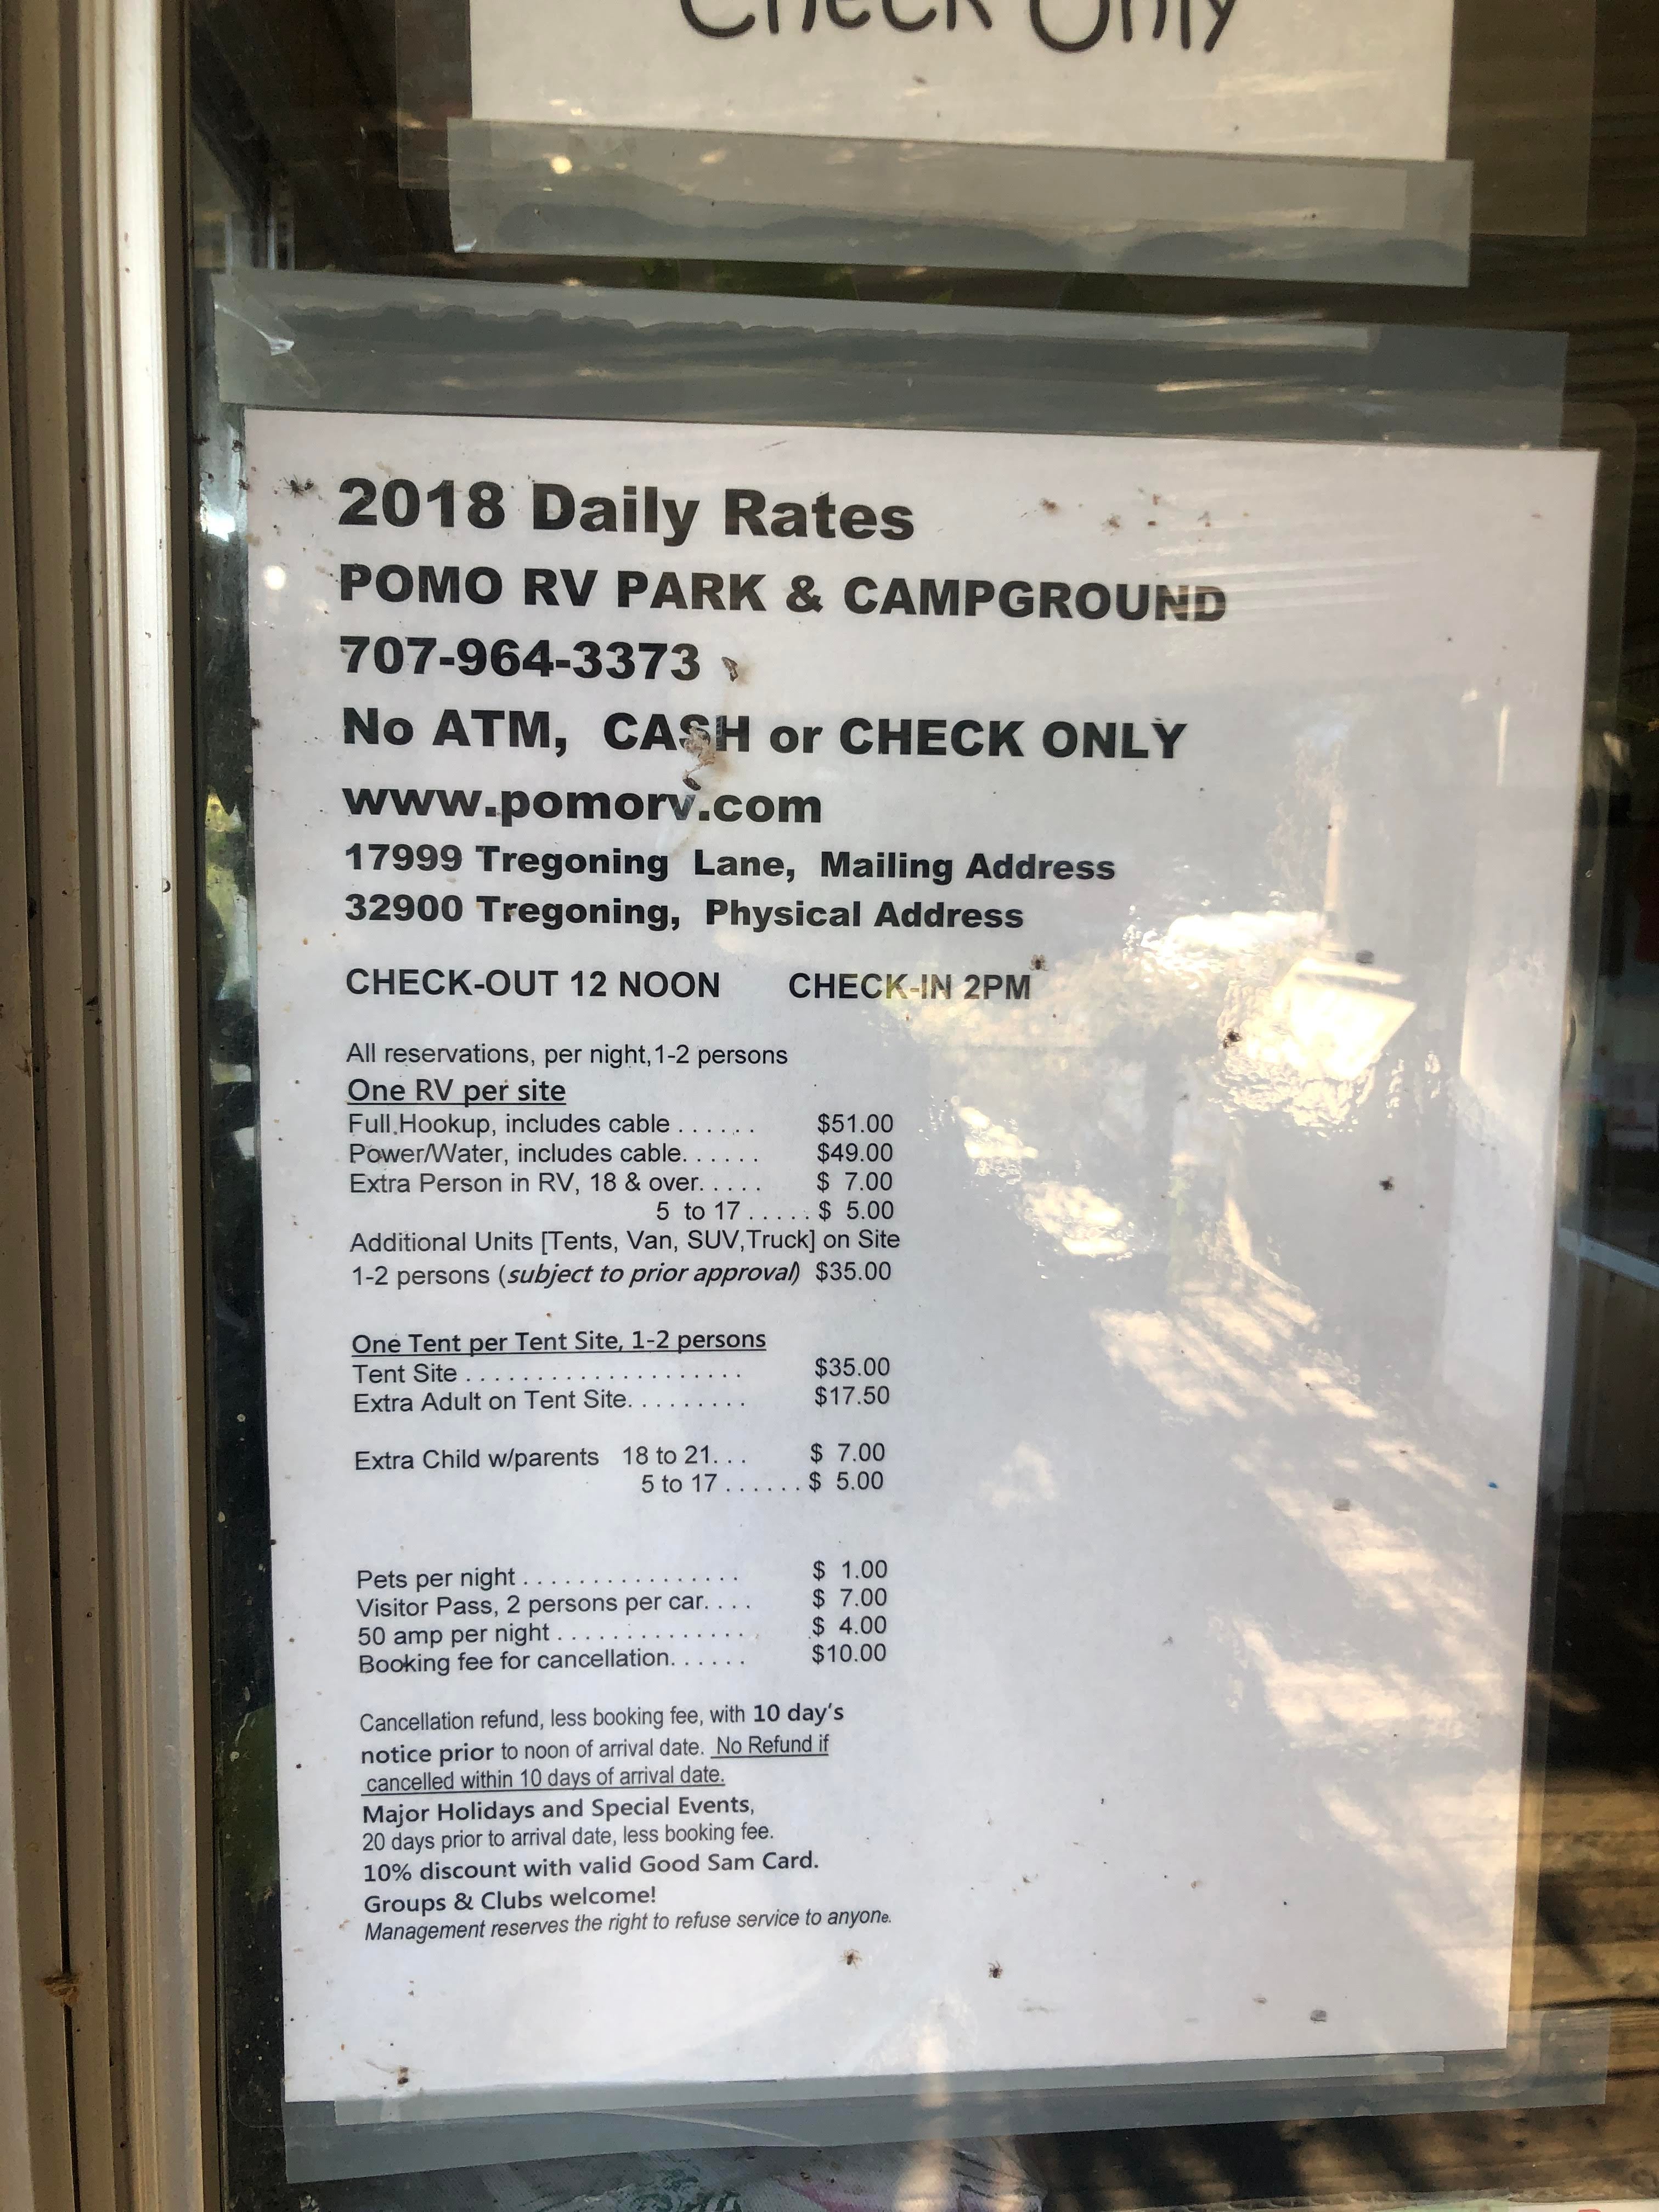 Camper submitted image from Pomo RV Park & Campground - 3